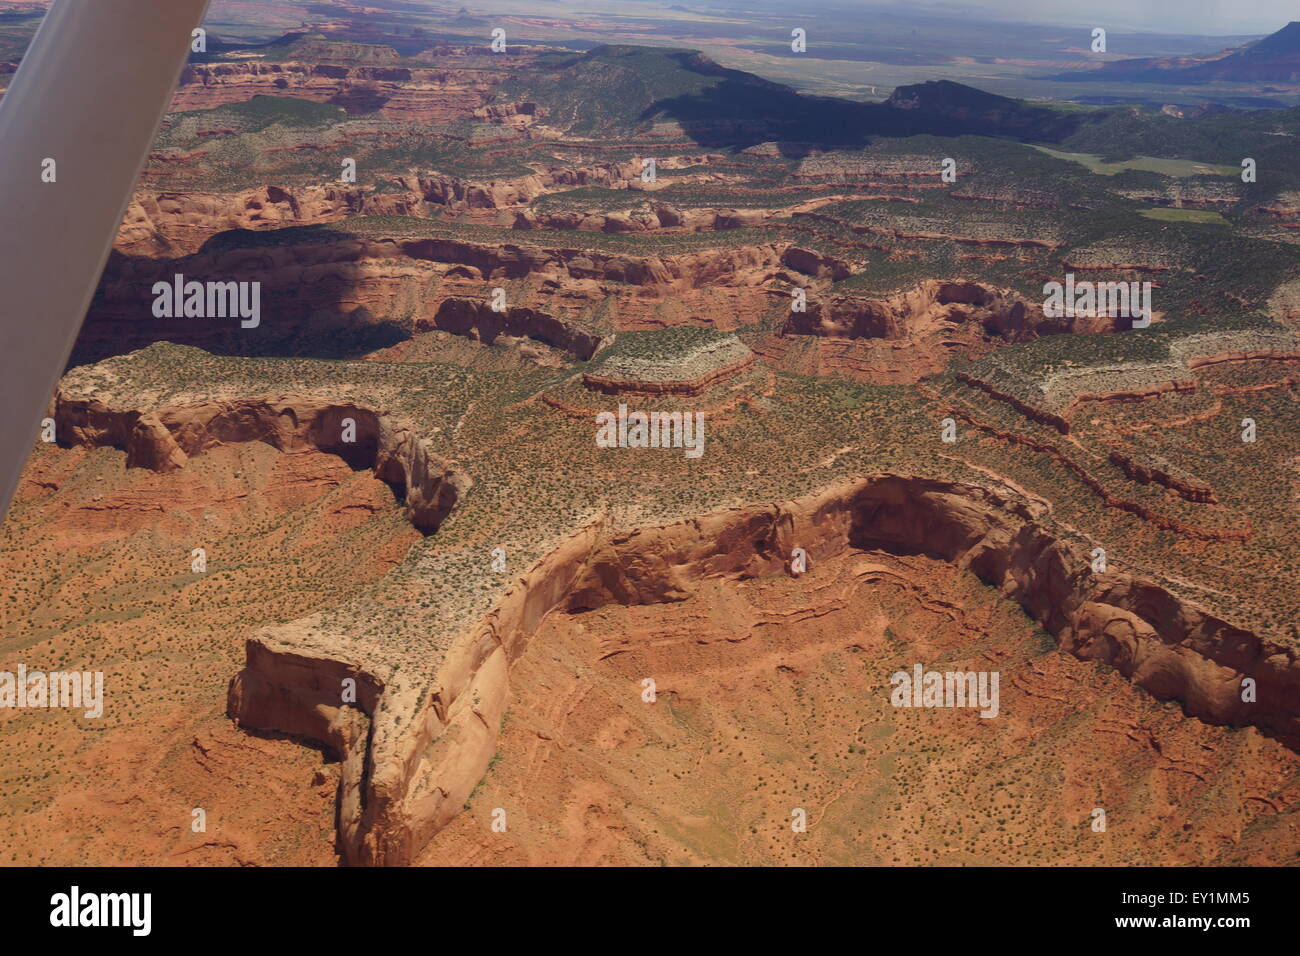 Red Valley area, Photo - Alamy